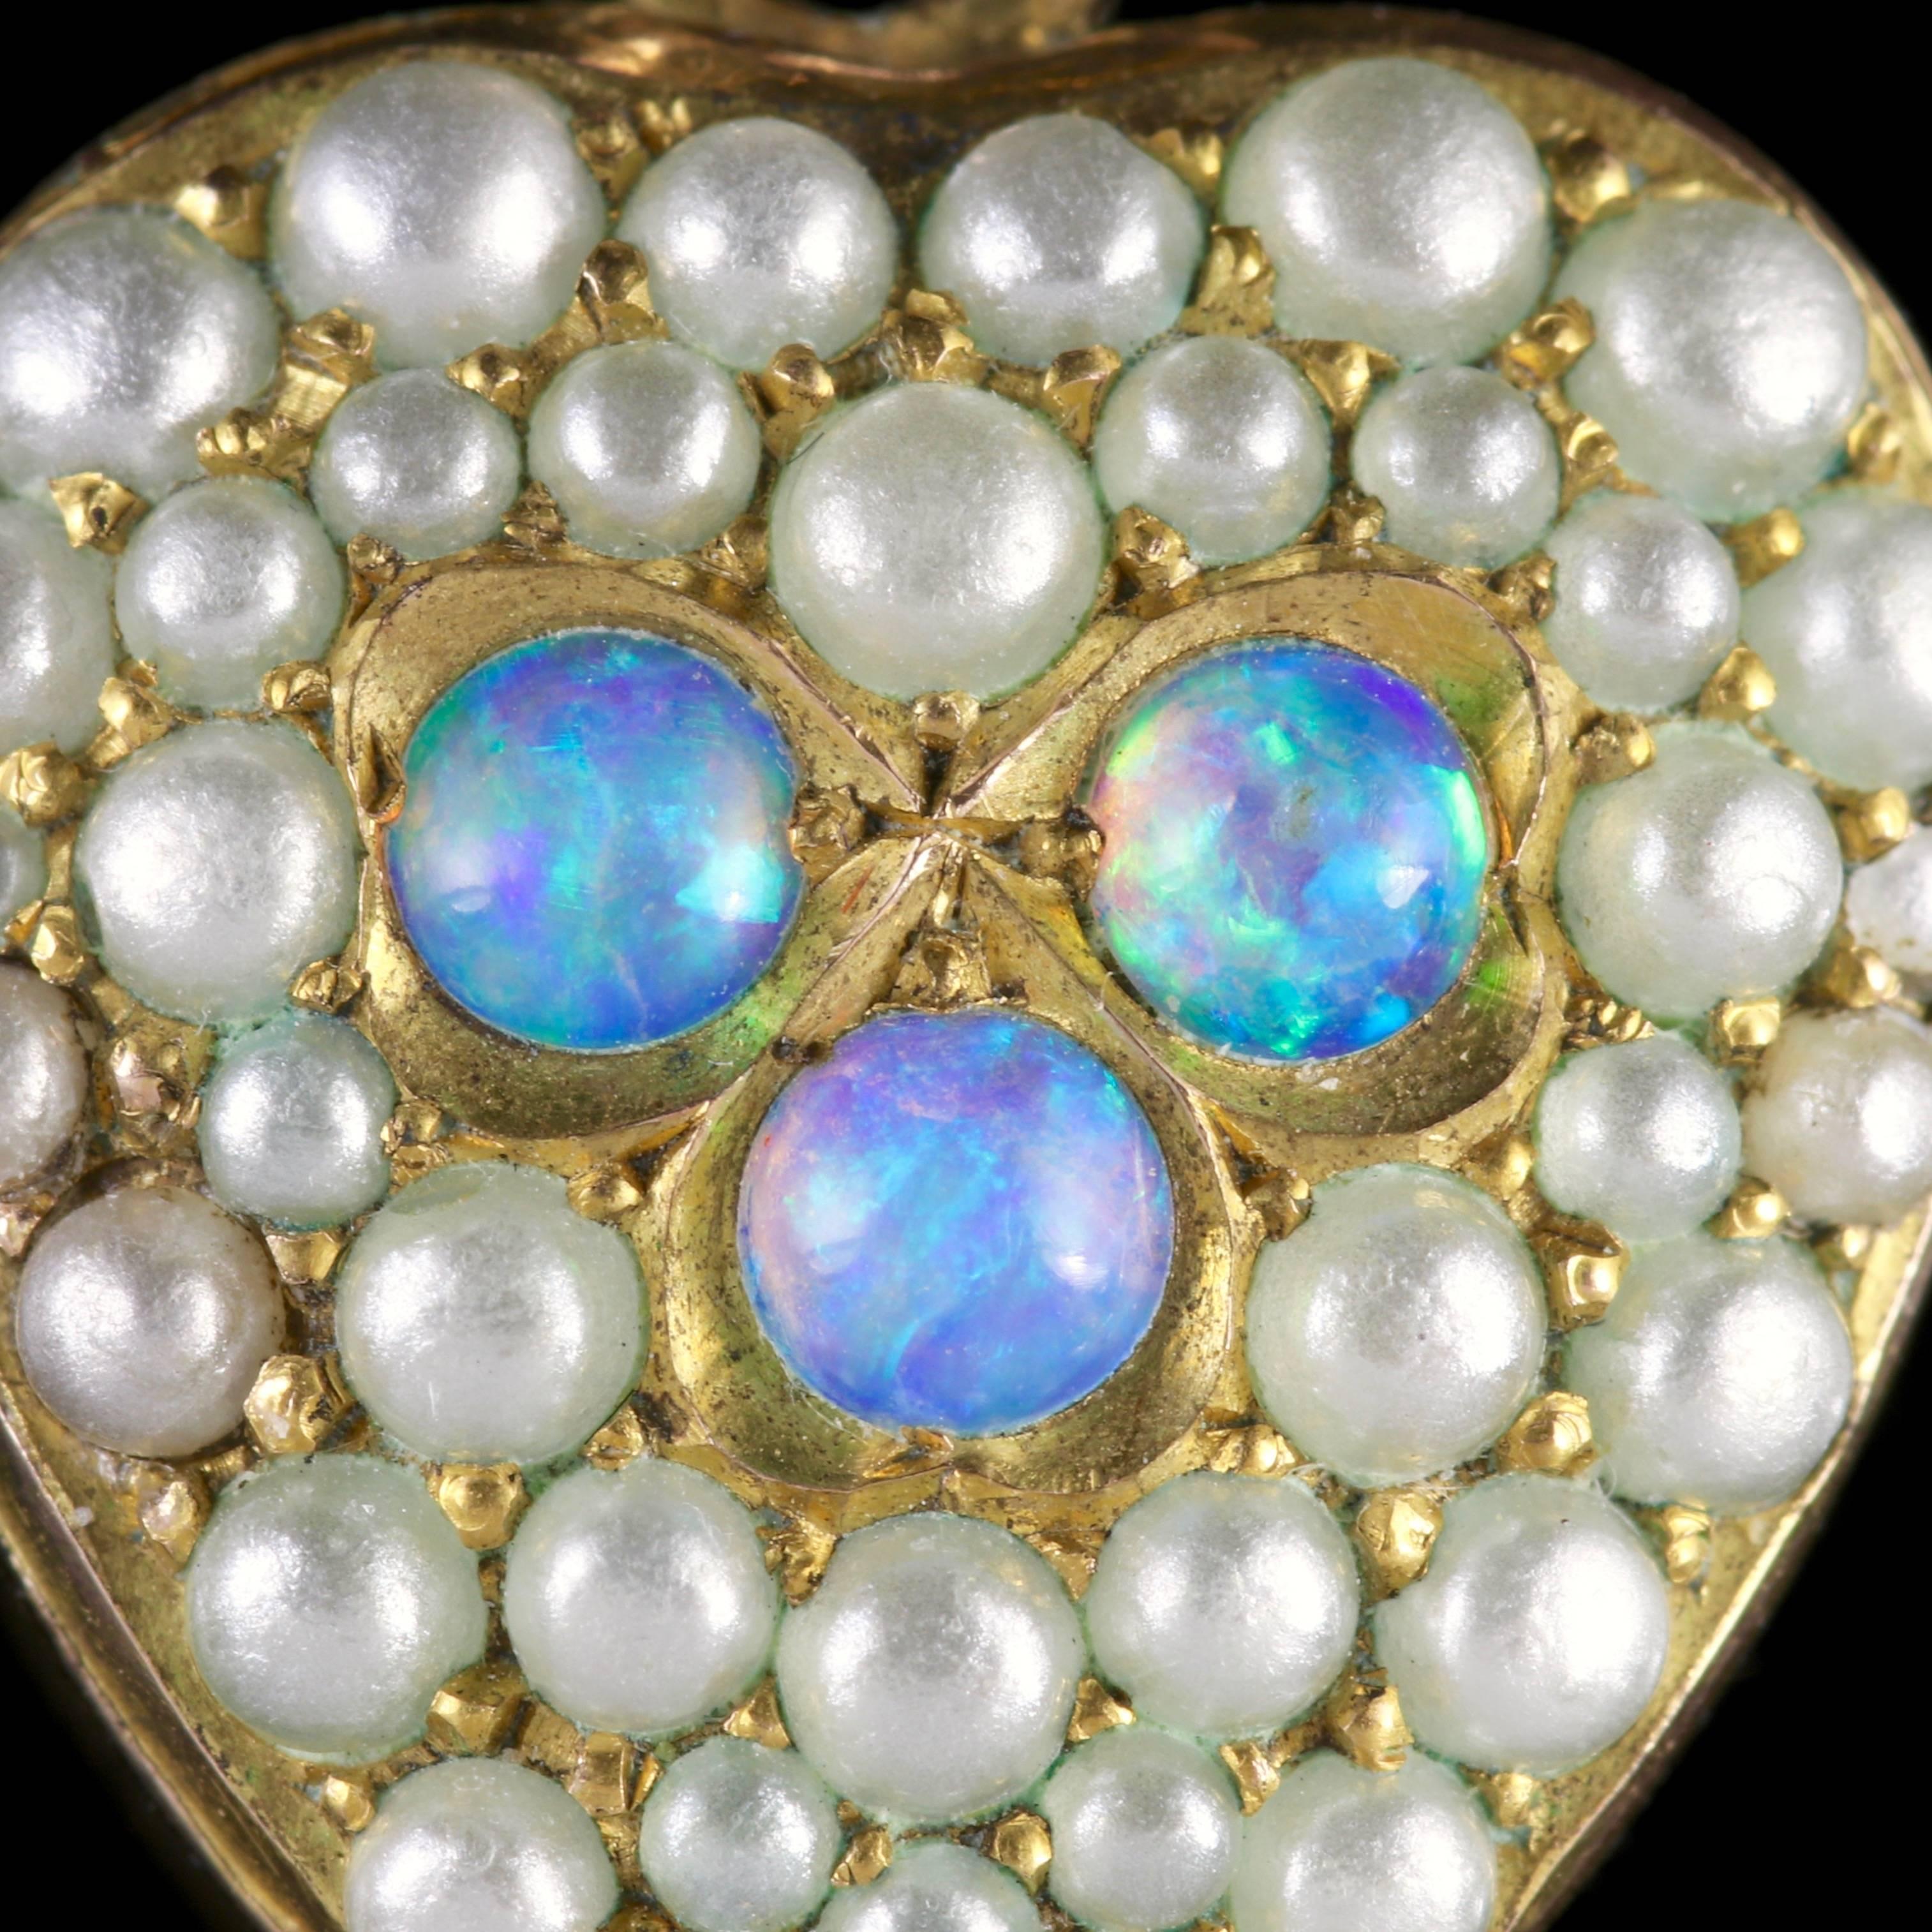 To read more please click continue reading below-

This genuine antique Victorian 15ct Yellow Gold heart is adorned with Pearls and lovely natural Opals, Circa 1890.

Three beautiful Opals sit in the centre of this fabulous heart complimented by